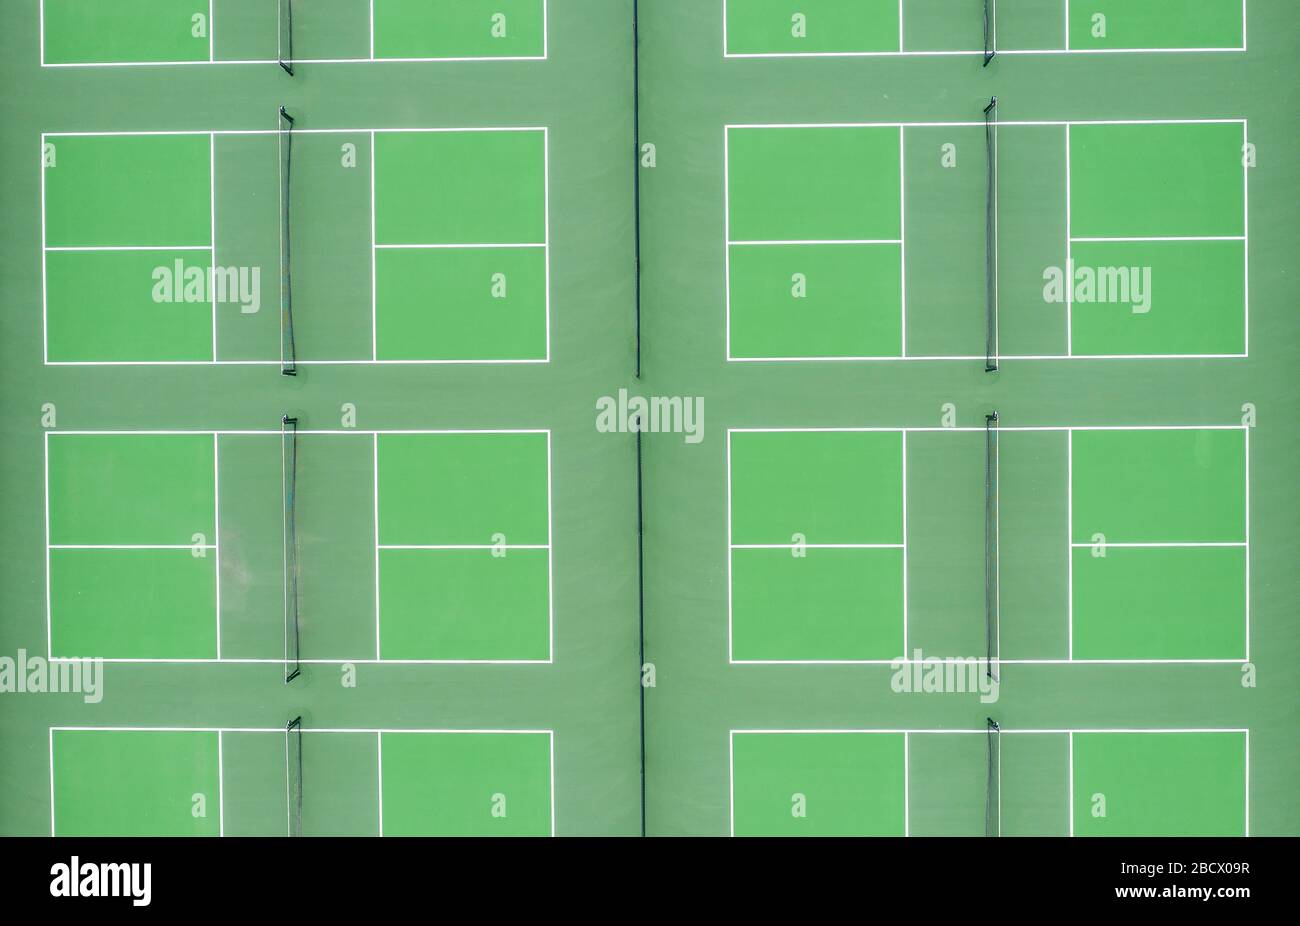 Aerial top down view of community sport center green tennis badminton courts Stock Photo